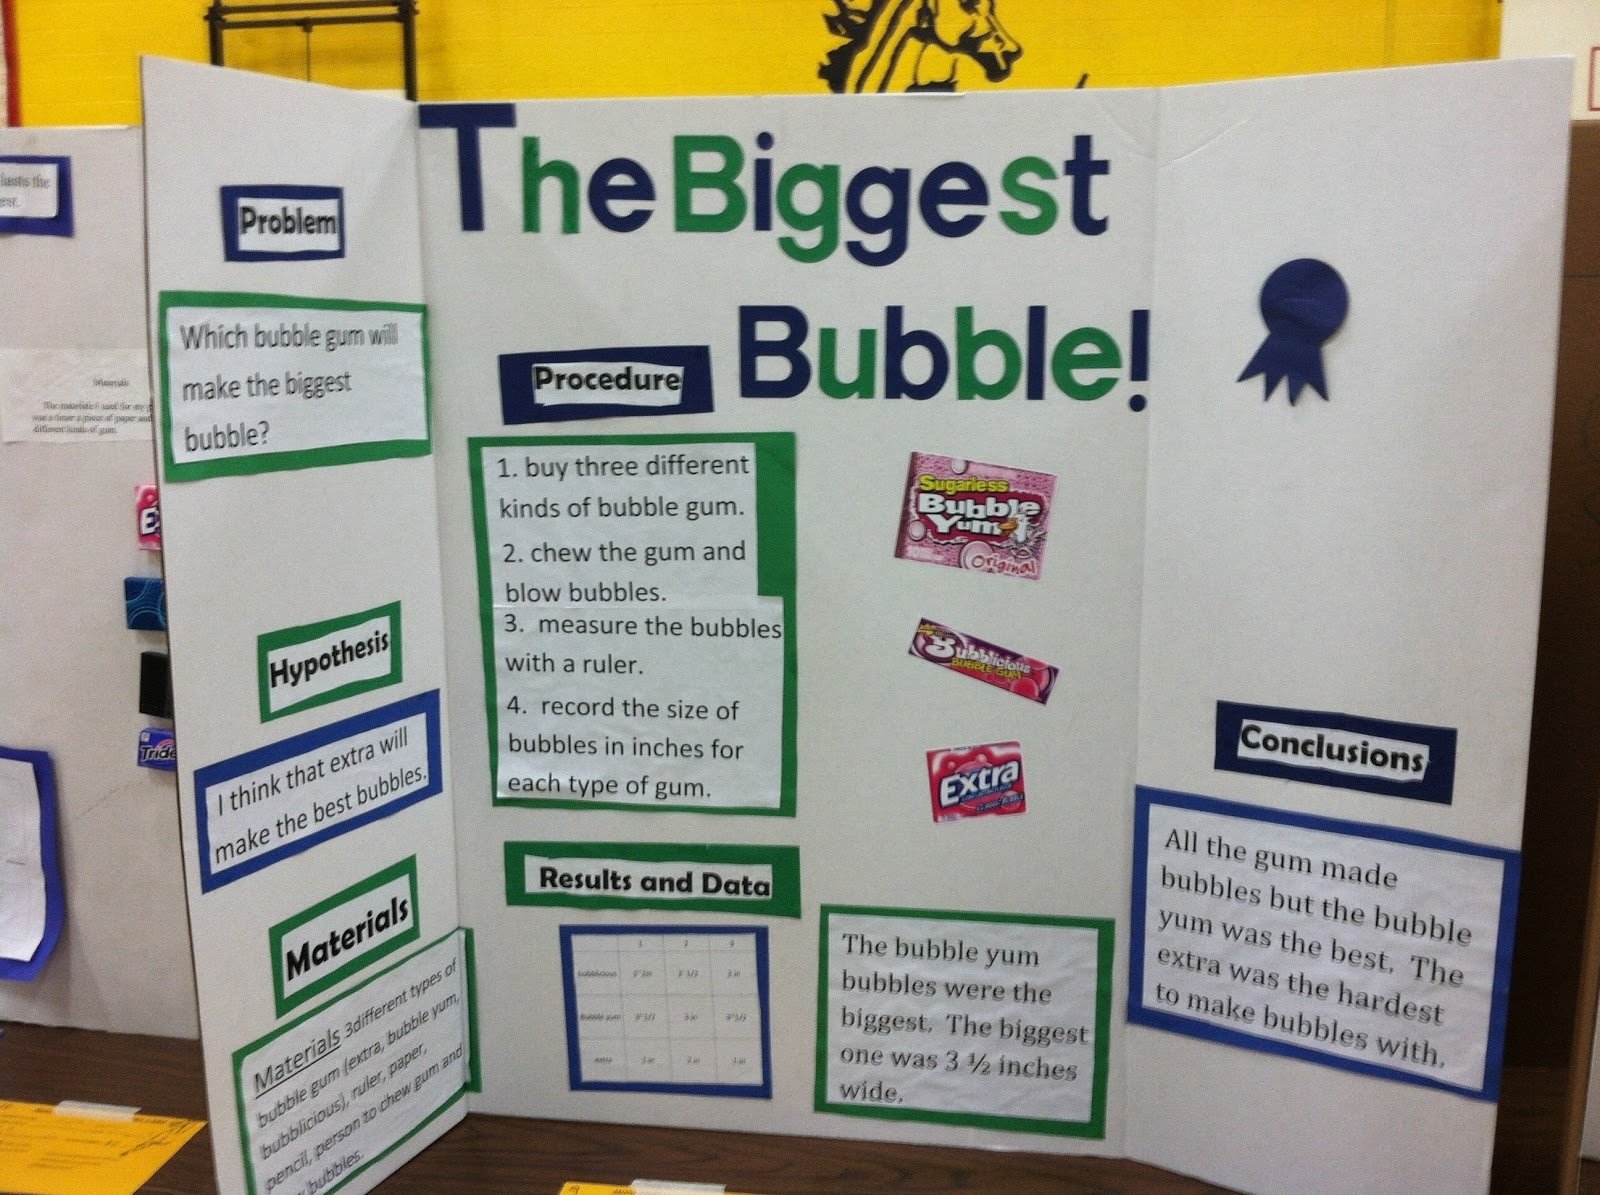 10 Most Popular Ideas For Science Fair Projects For 5Th Graders easy 7th grade science fair projects coursework help 6 2022